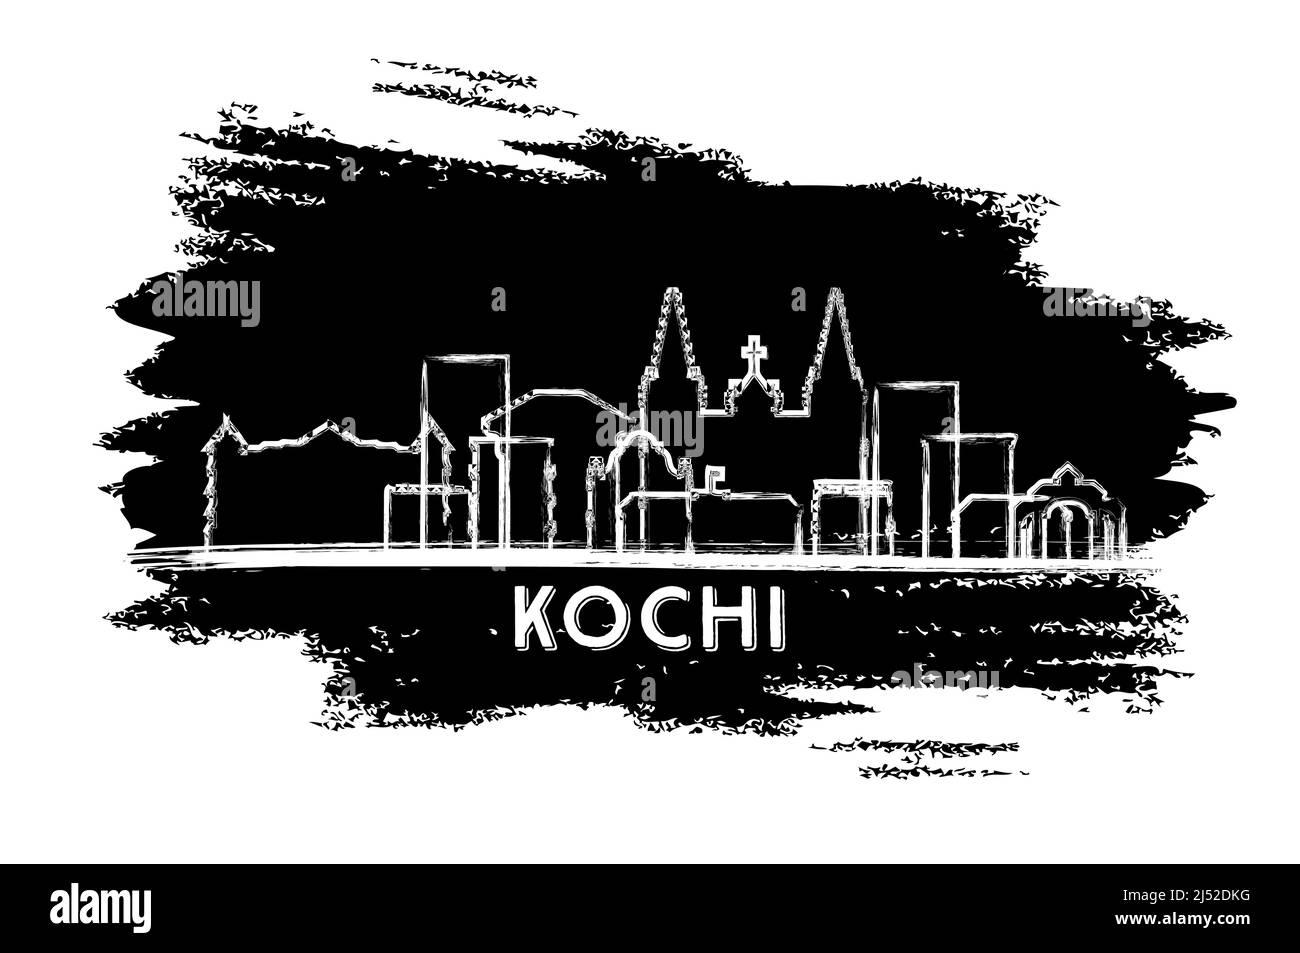 Kochi India City Skyline Silhouette. Hand Drawn Sketch. Business Travel and Tourism Concept with Historic Architecture. Vector Illustration. Stock Vector